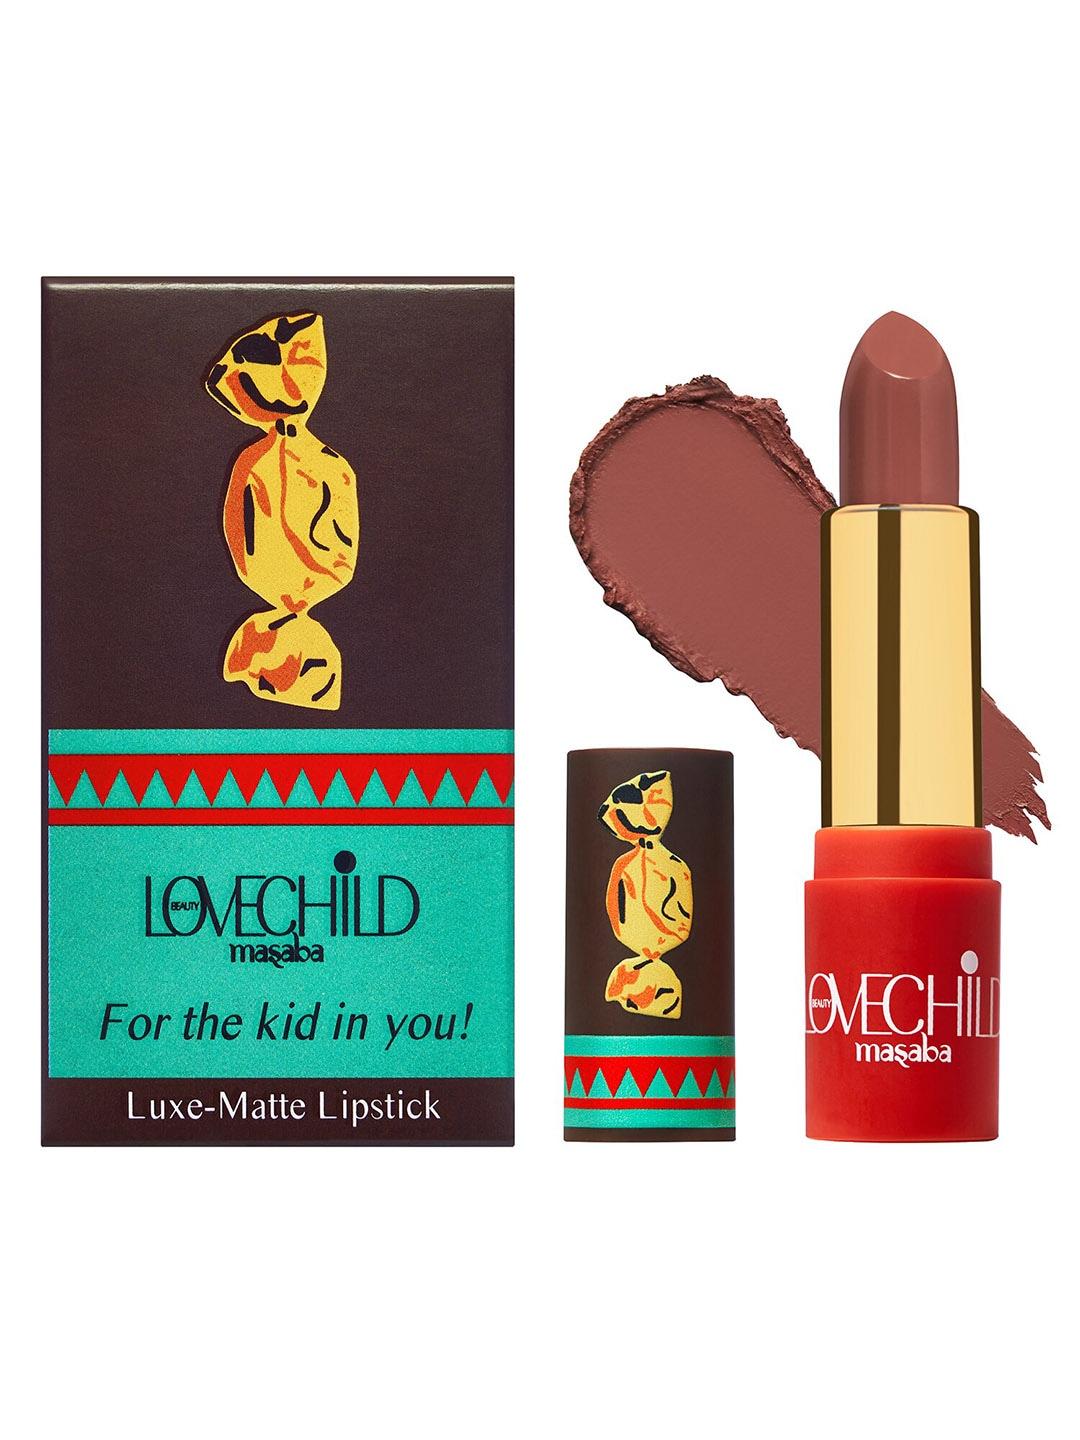 Lovechild Masaba For The Kid In You Luxe-Matte Lipstick 4 g-Caramel 04